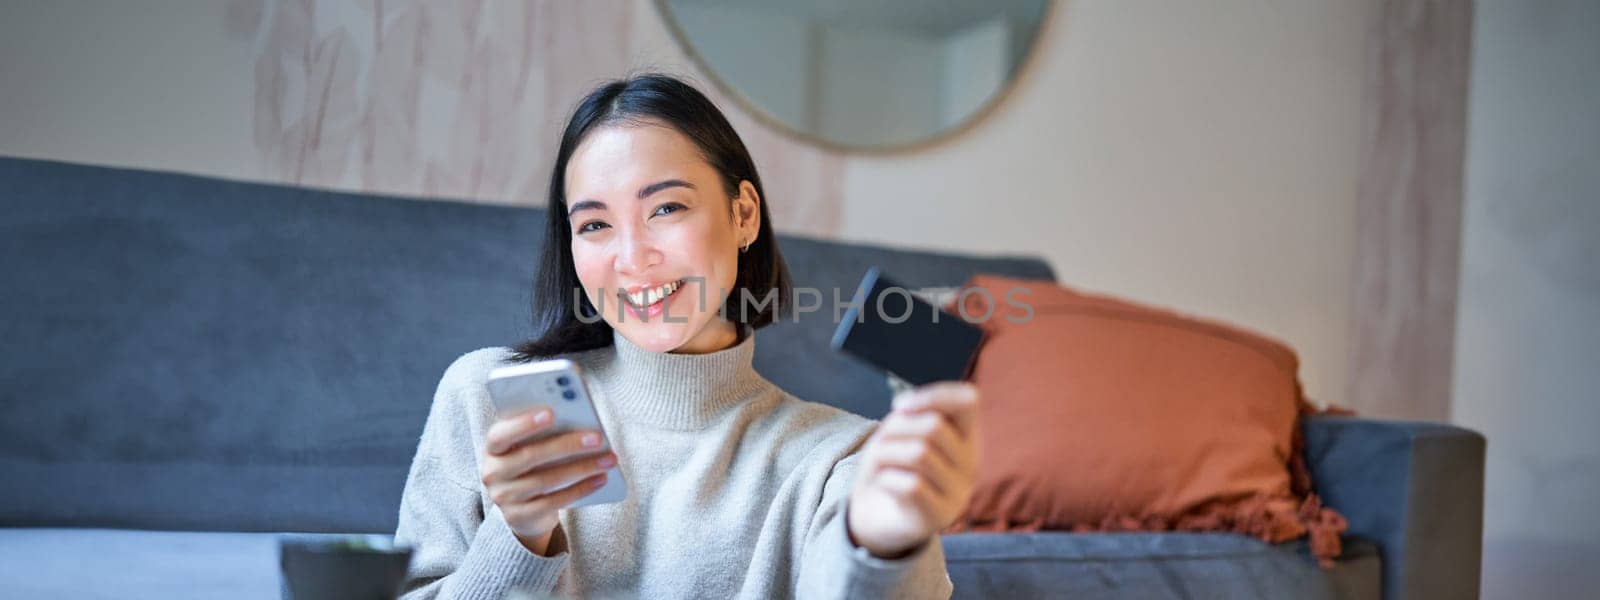 Smiling asian girl with smartphone and credit card, does her shopping online, uses mobile phone to order home delivery.